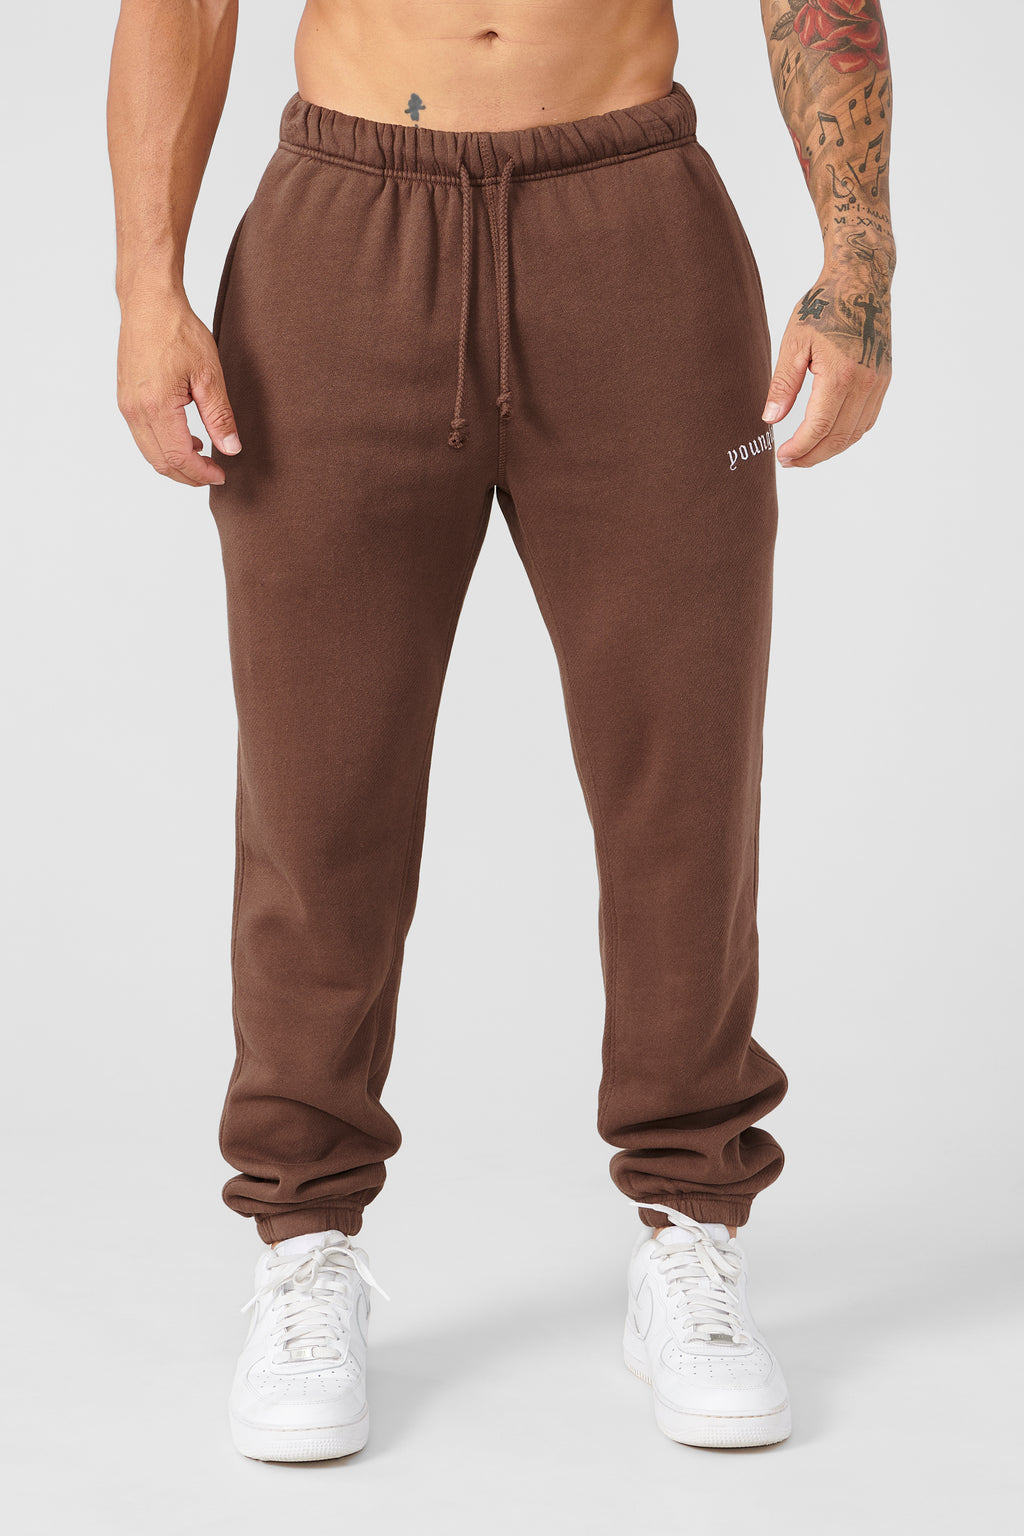 Youngla Joggers Tan - $31 (43% Off Retail) - From chelsea